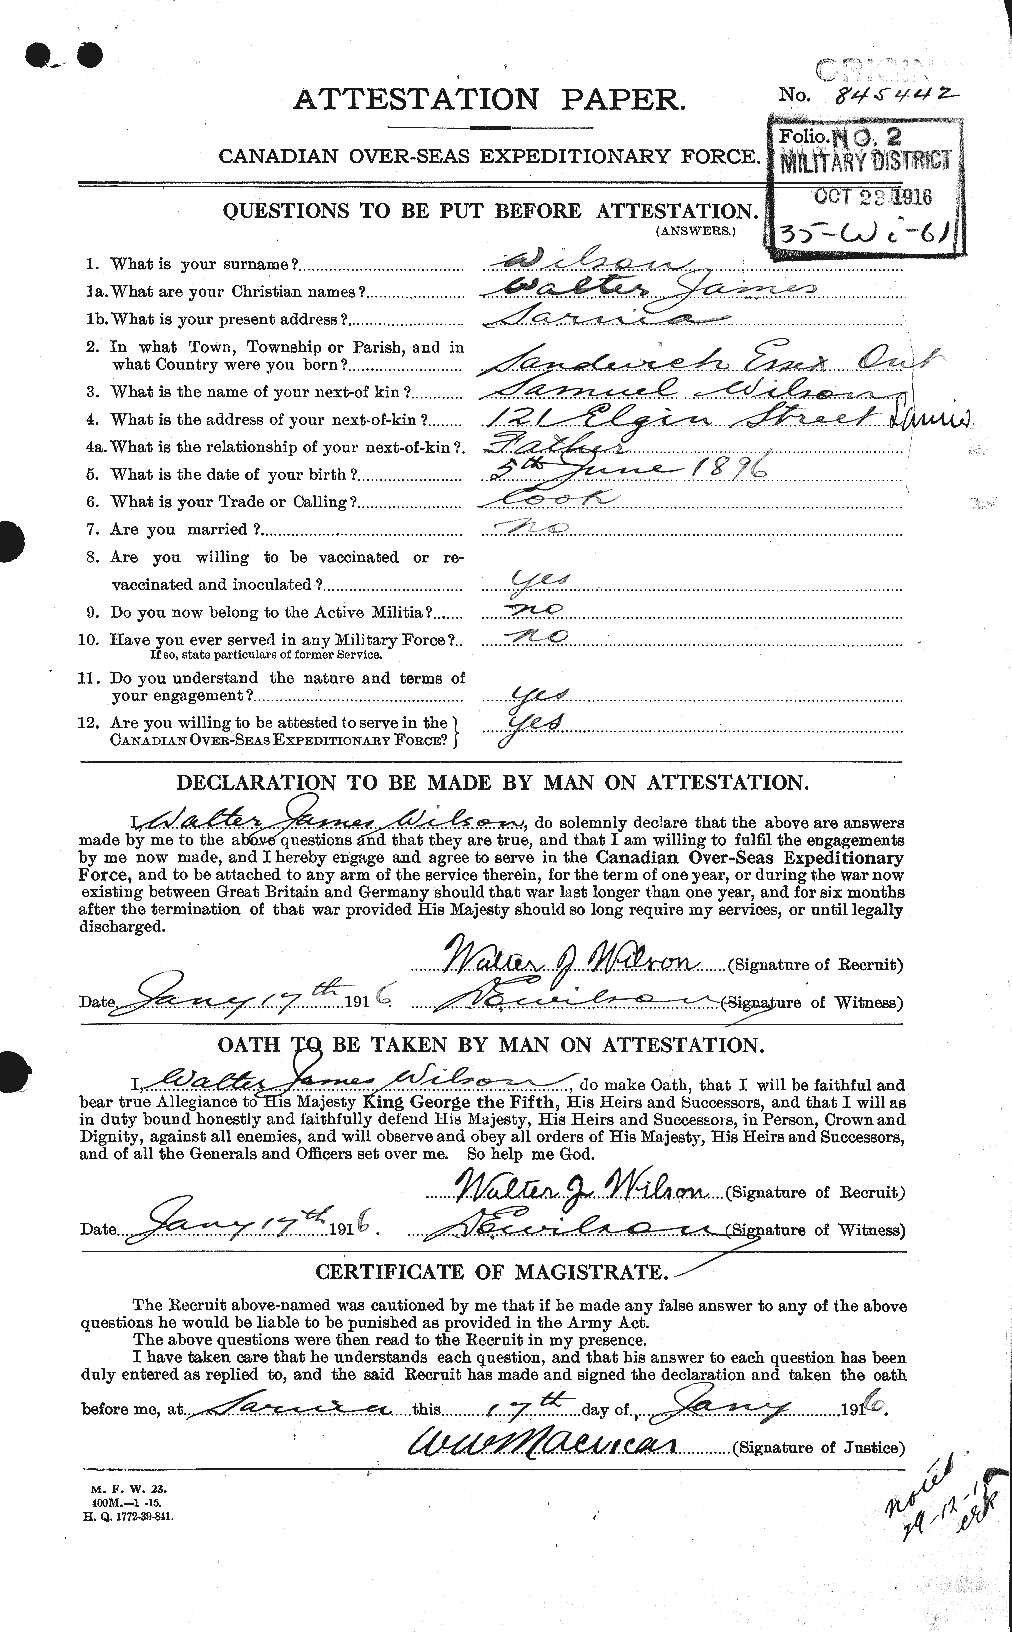 Personnel Records of the First World War - CEF 681756a